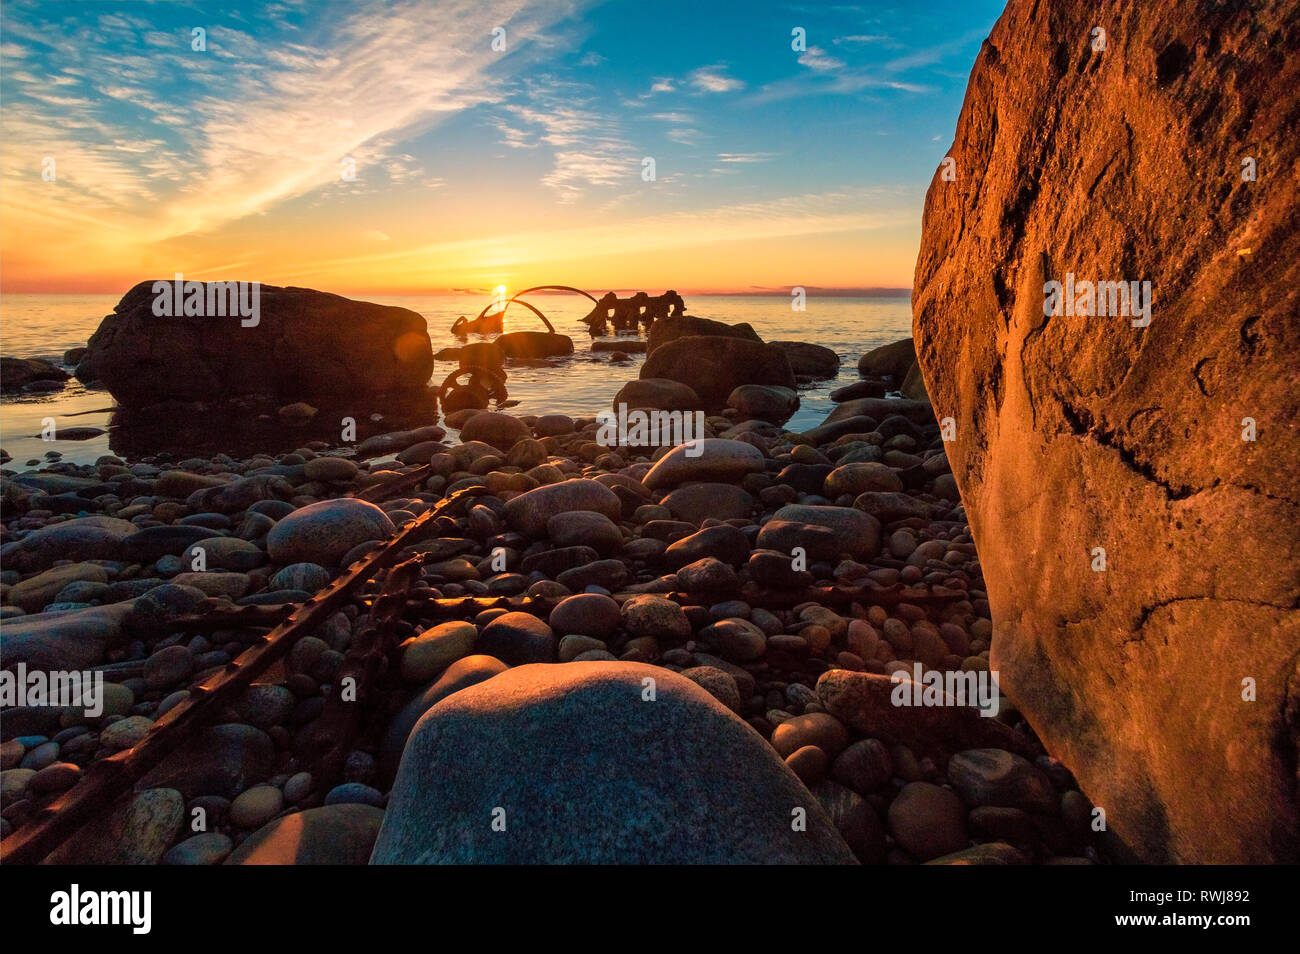 Sunsetting over the gulf of St. Lawerence at the site of the century old ship wreck of th s.s. Ethie, Gros Morne National Park, Newfoundland and Labrador Stock Photo